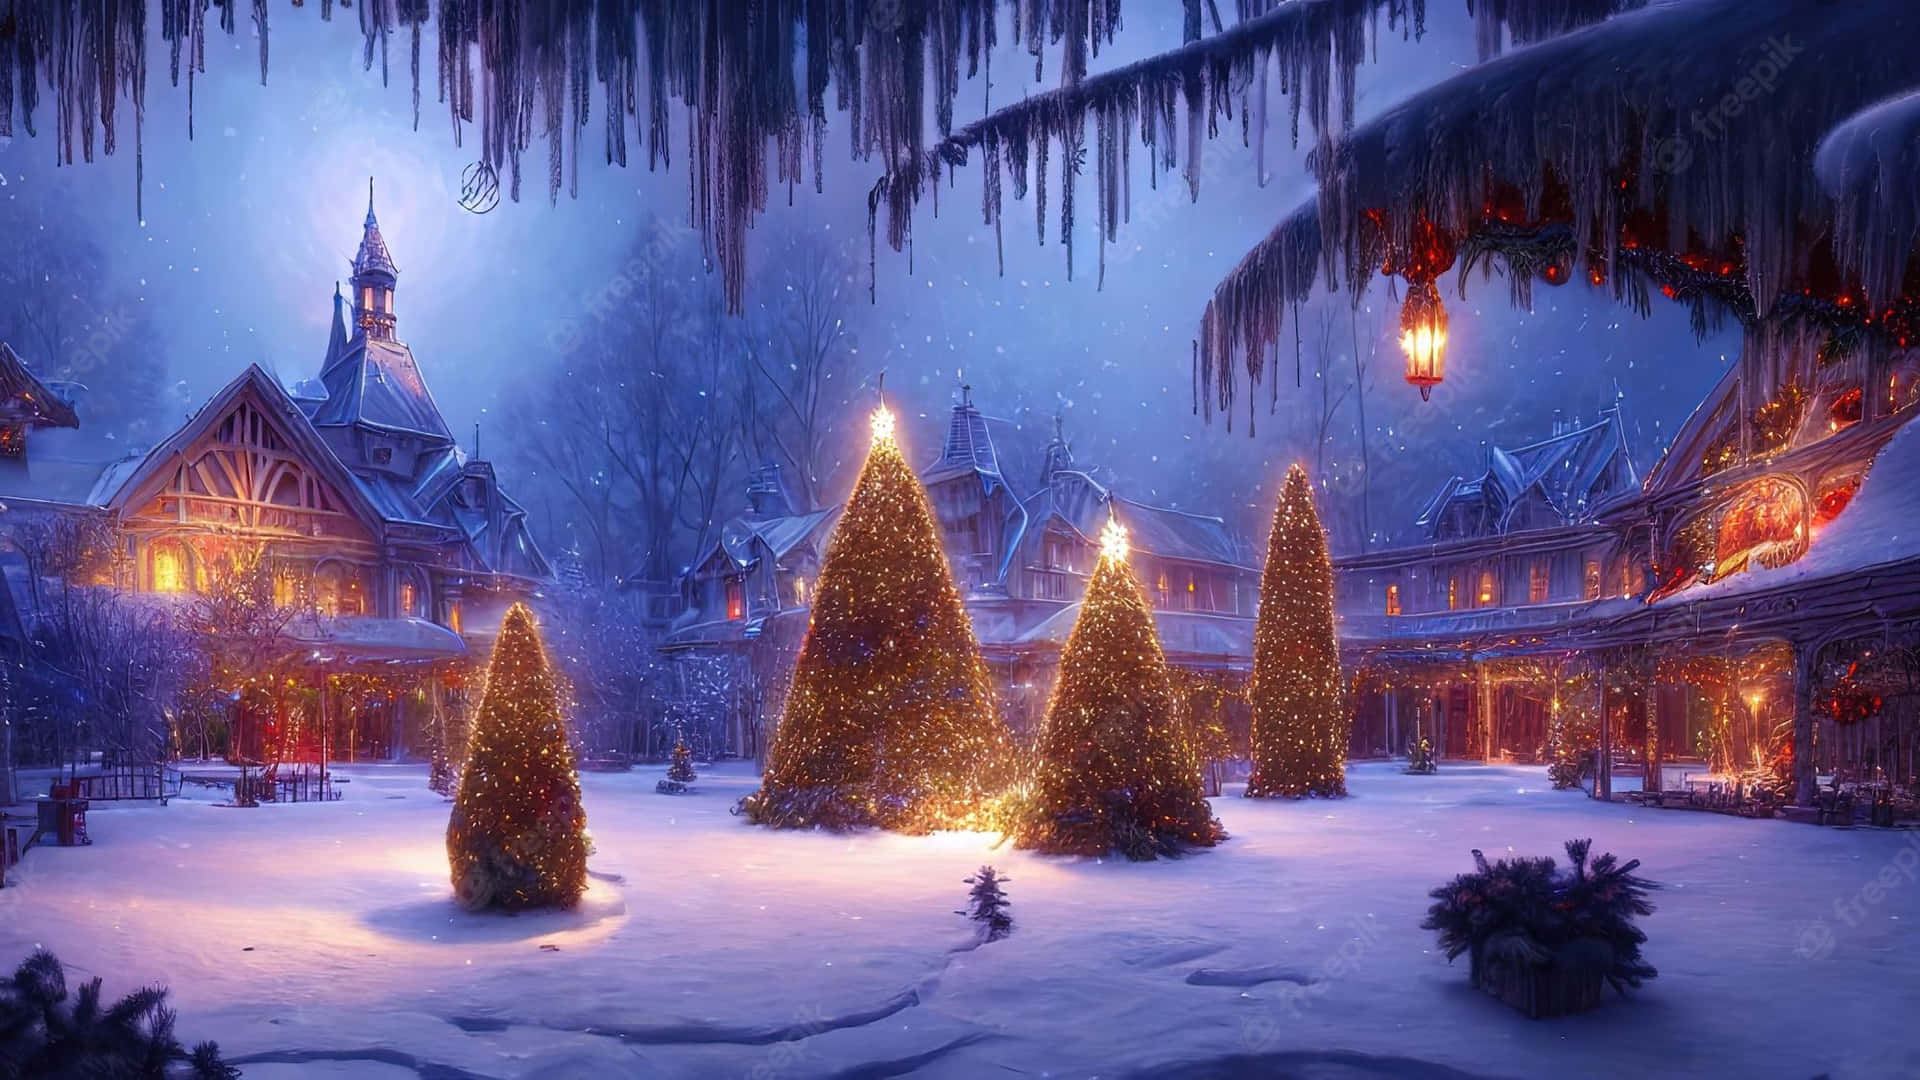 Welcome to the tranquil Christmas Village Wallpaper